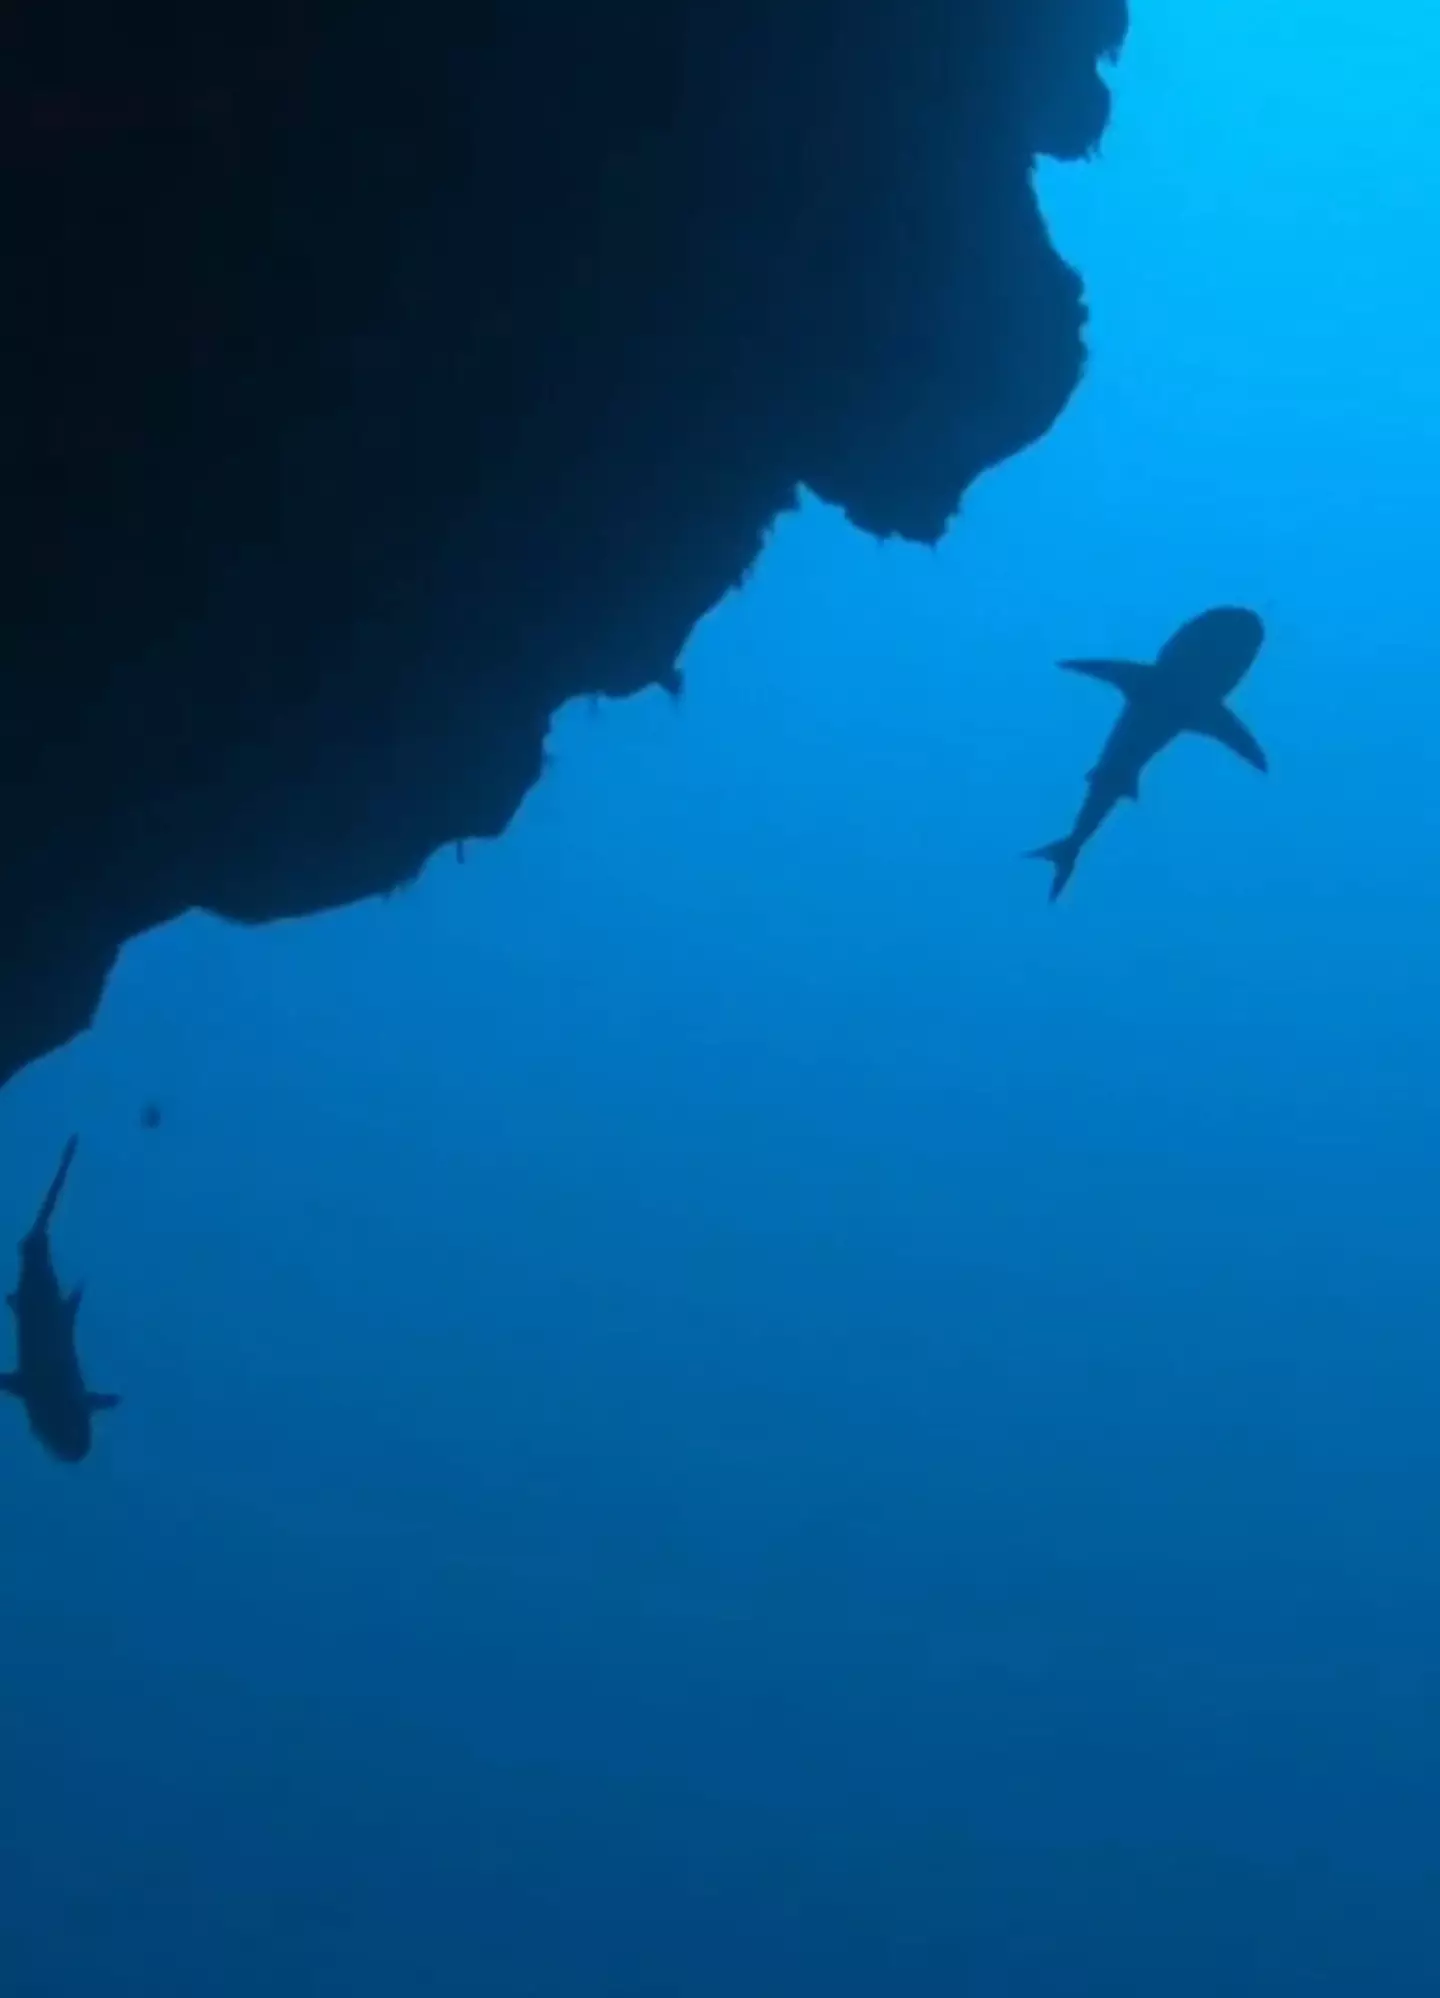 The diver showed giant sharks swimming overhead.